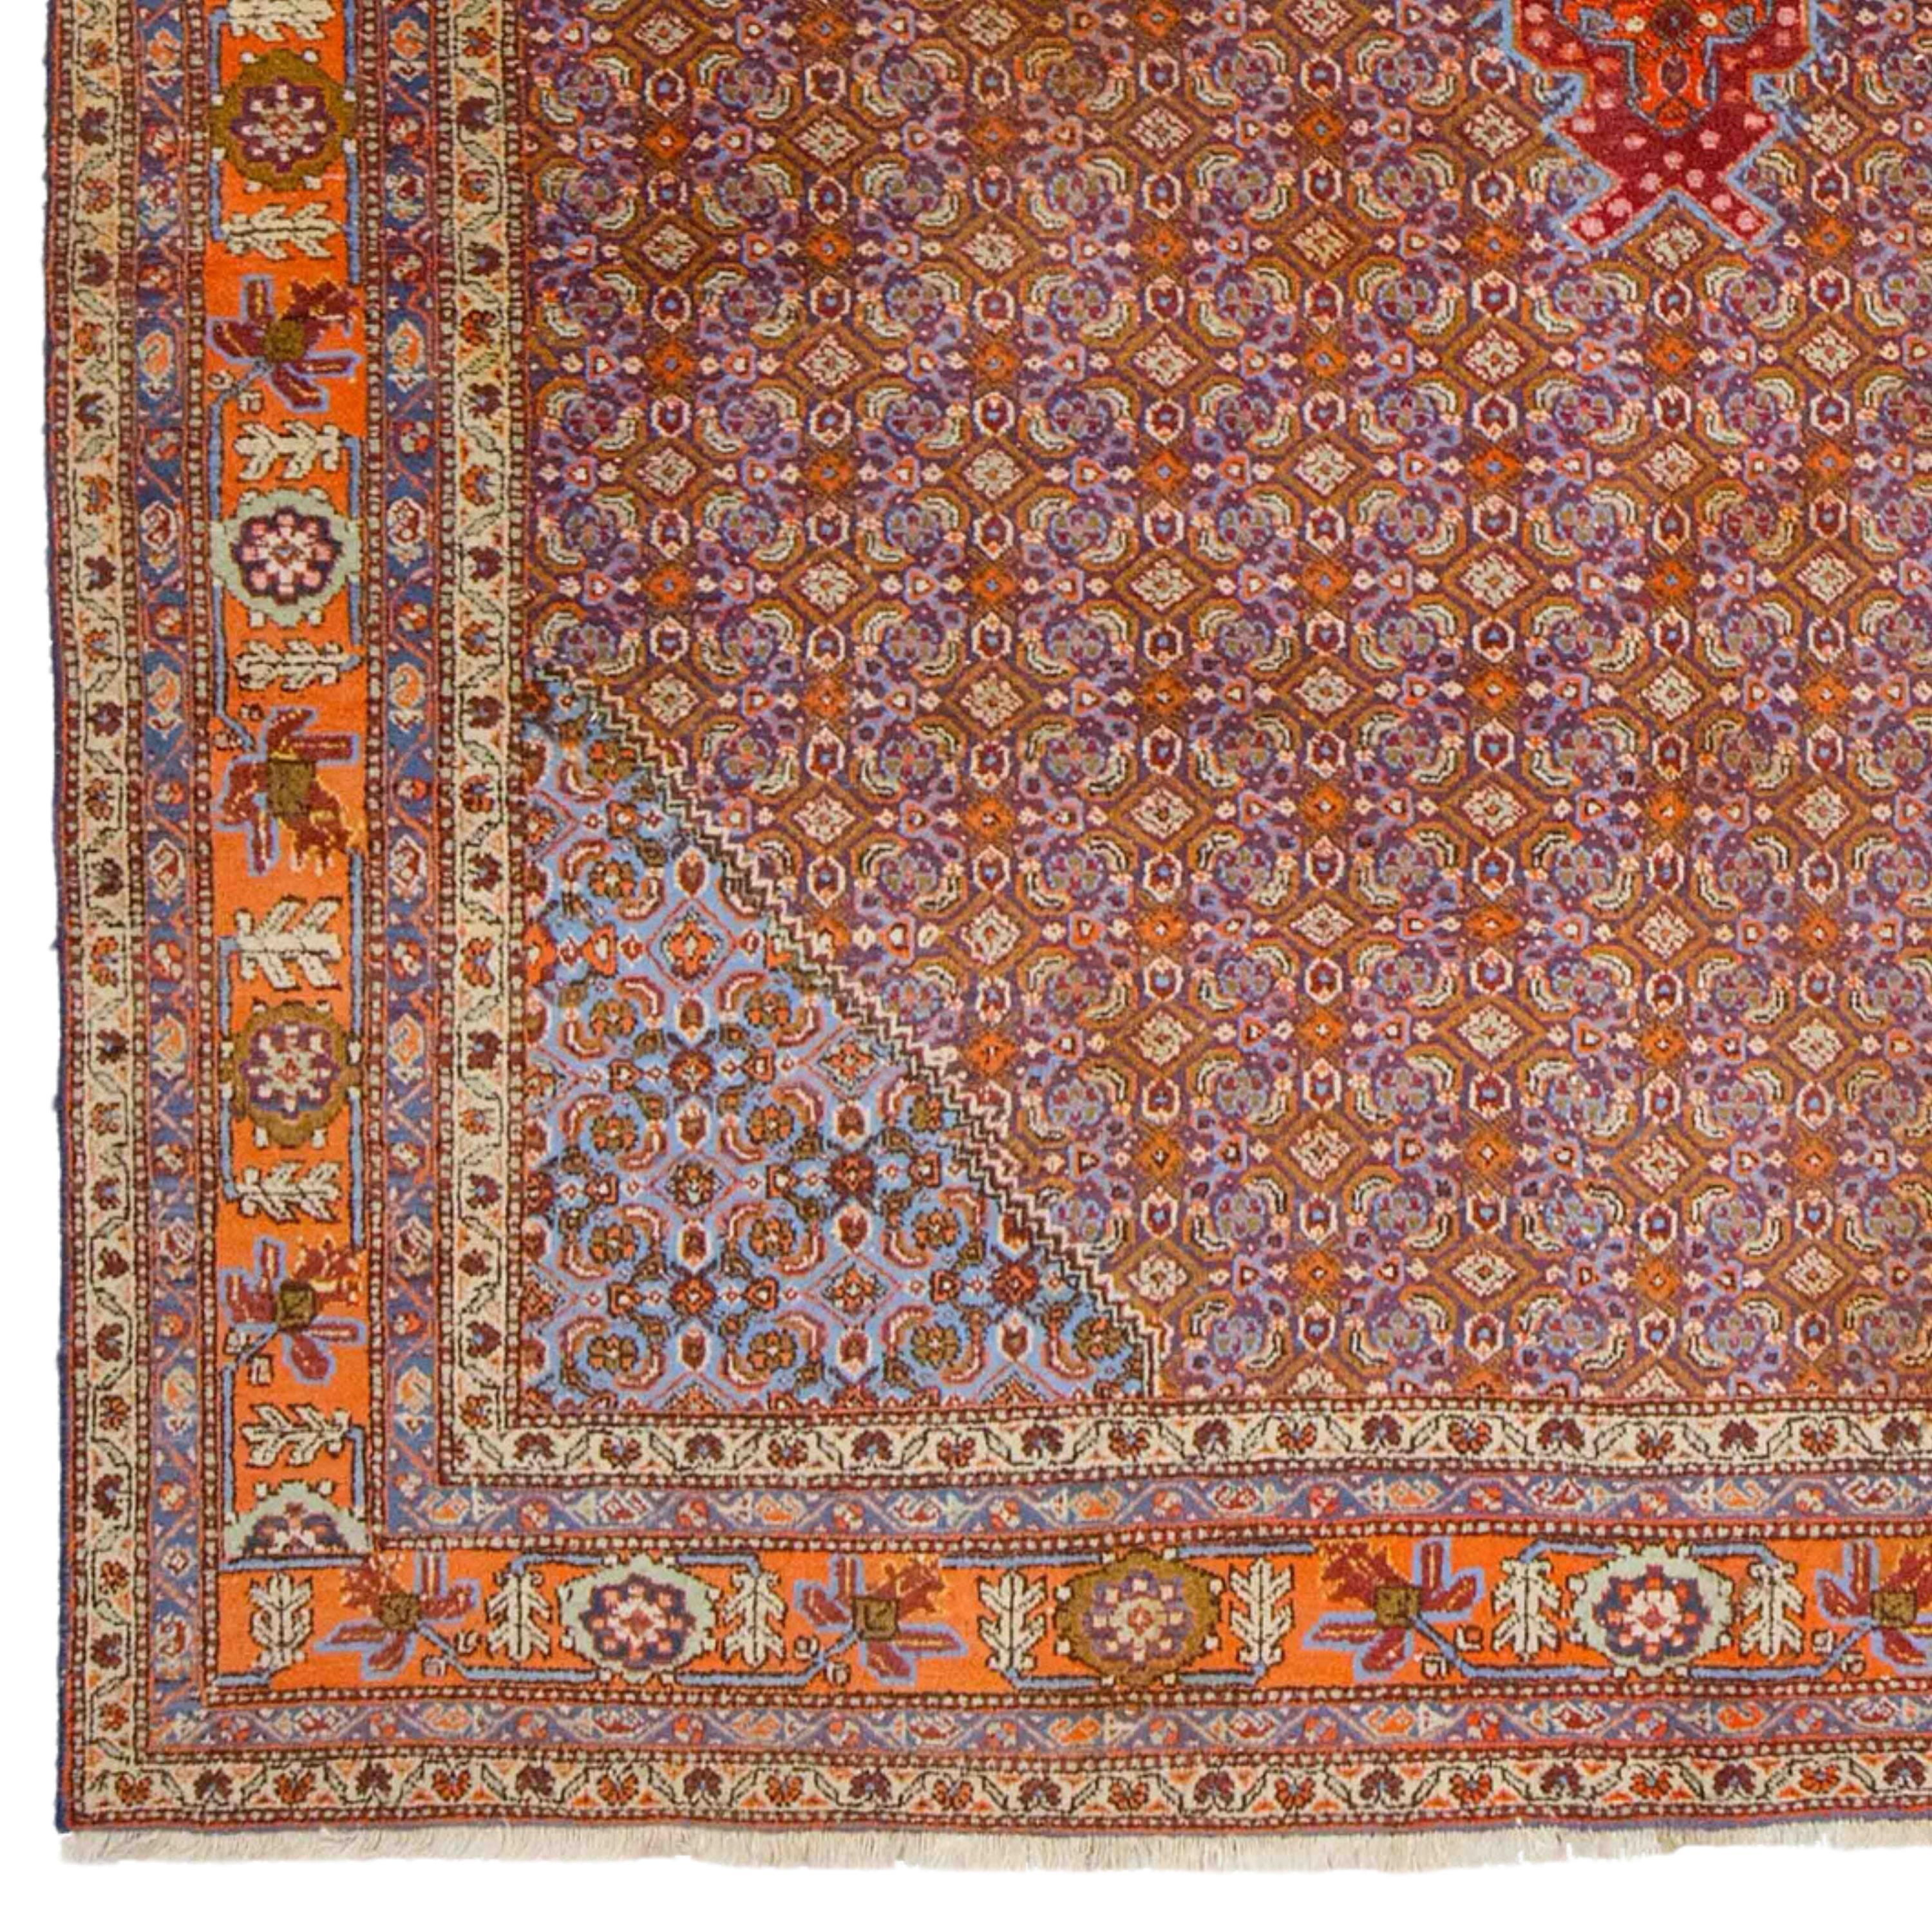 Antique Tabriz Rug 226x330 cm (7,41x10,82 ft) Late of 19th Century Azerbaijan Tabriz Rug

From the mid-19th century, there was a revival in commercial carpet production in Azerbaijan, and Tabriz became one of the country's most important centers